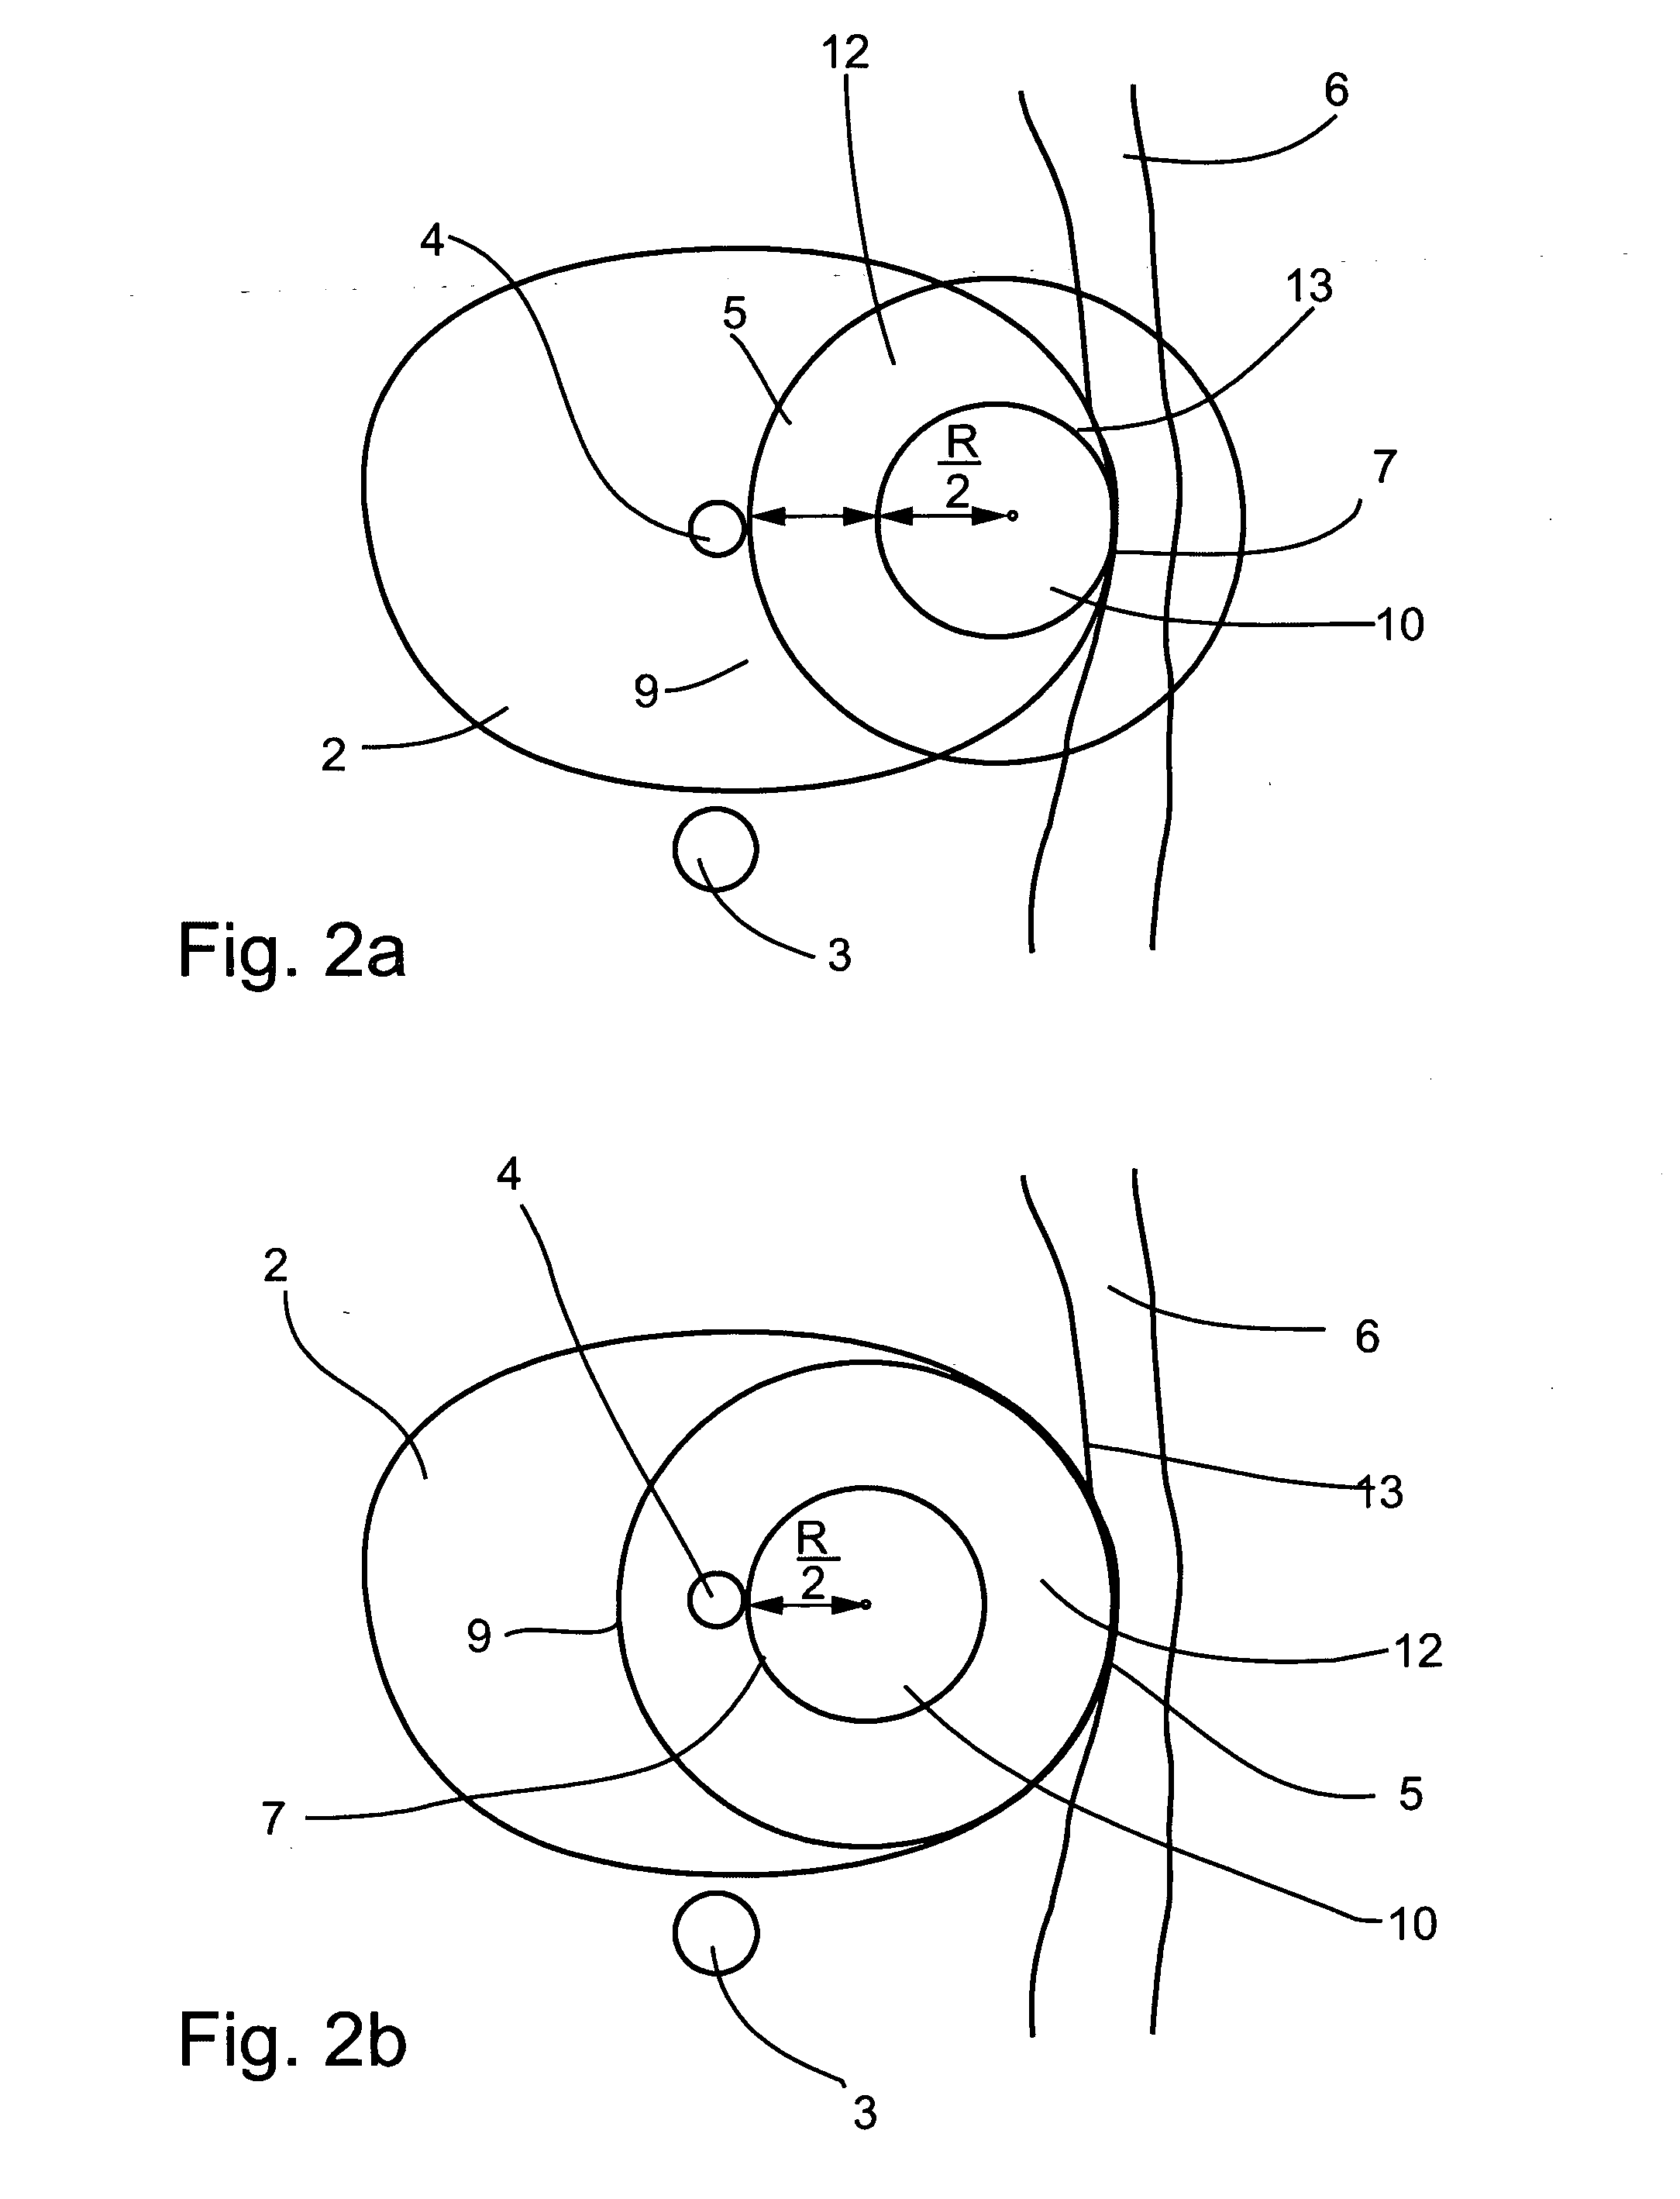 Planning and facilitation systems and methods for cryosurgery